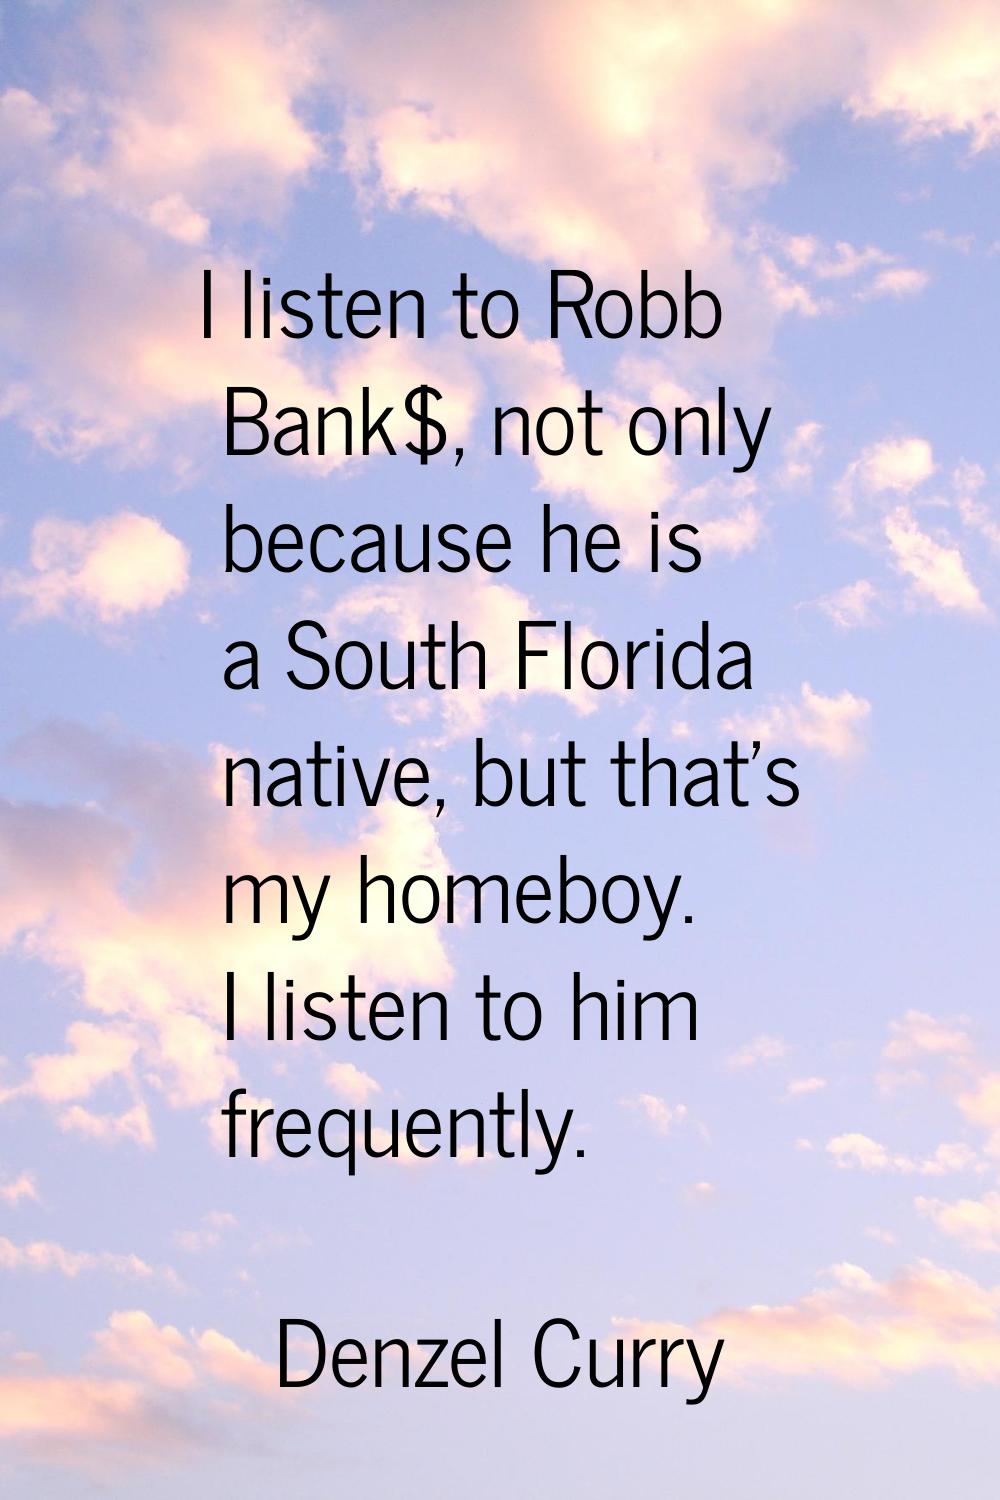 I listen to Robb Bank$, not only because he is a South Florida native, but that's my homeboy. I lis